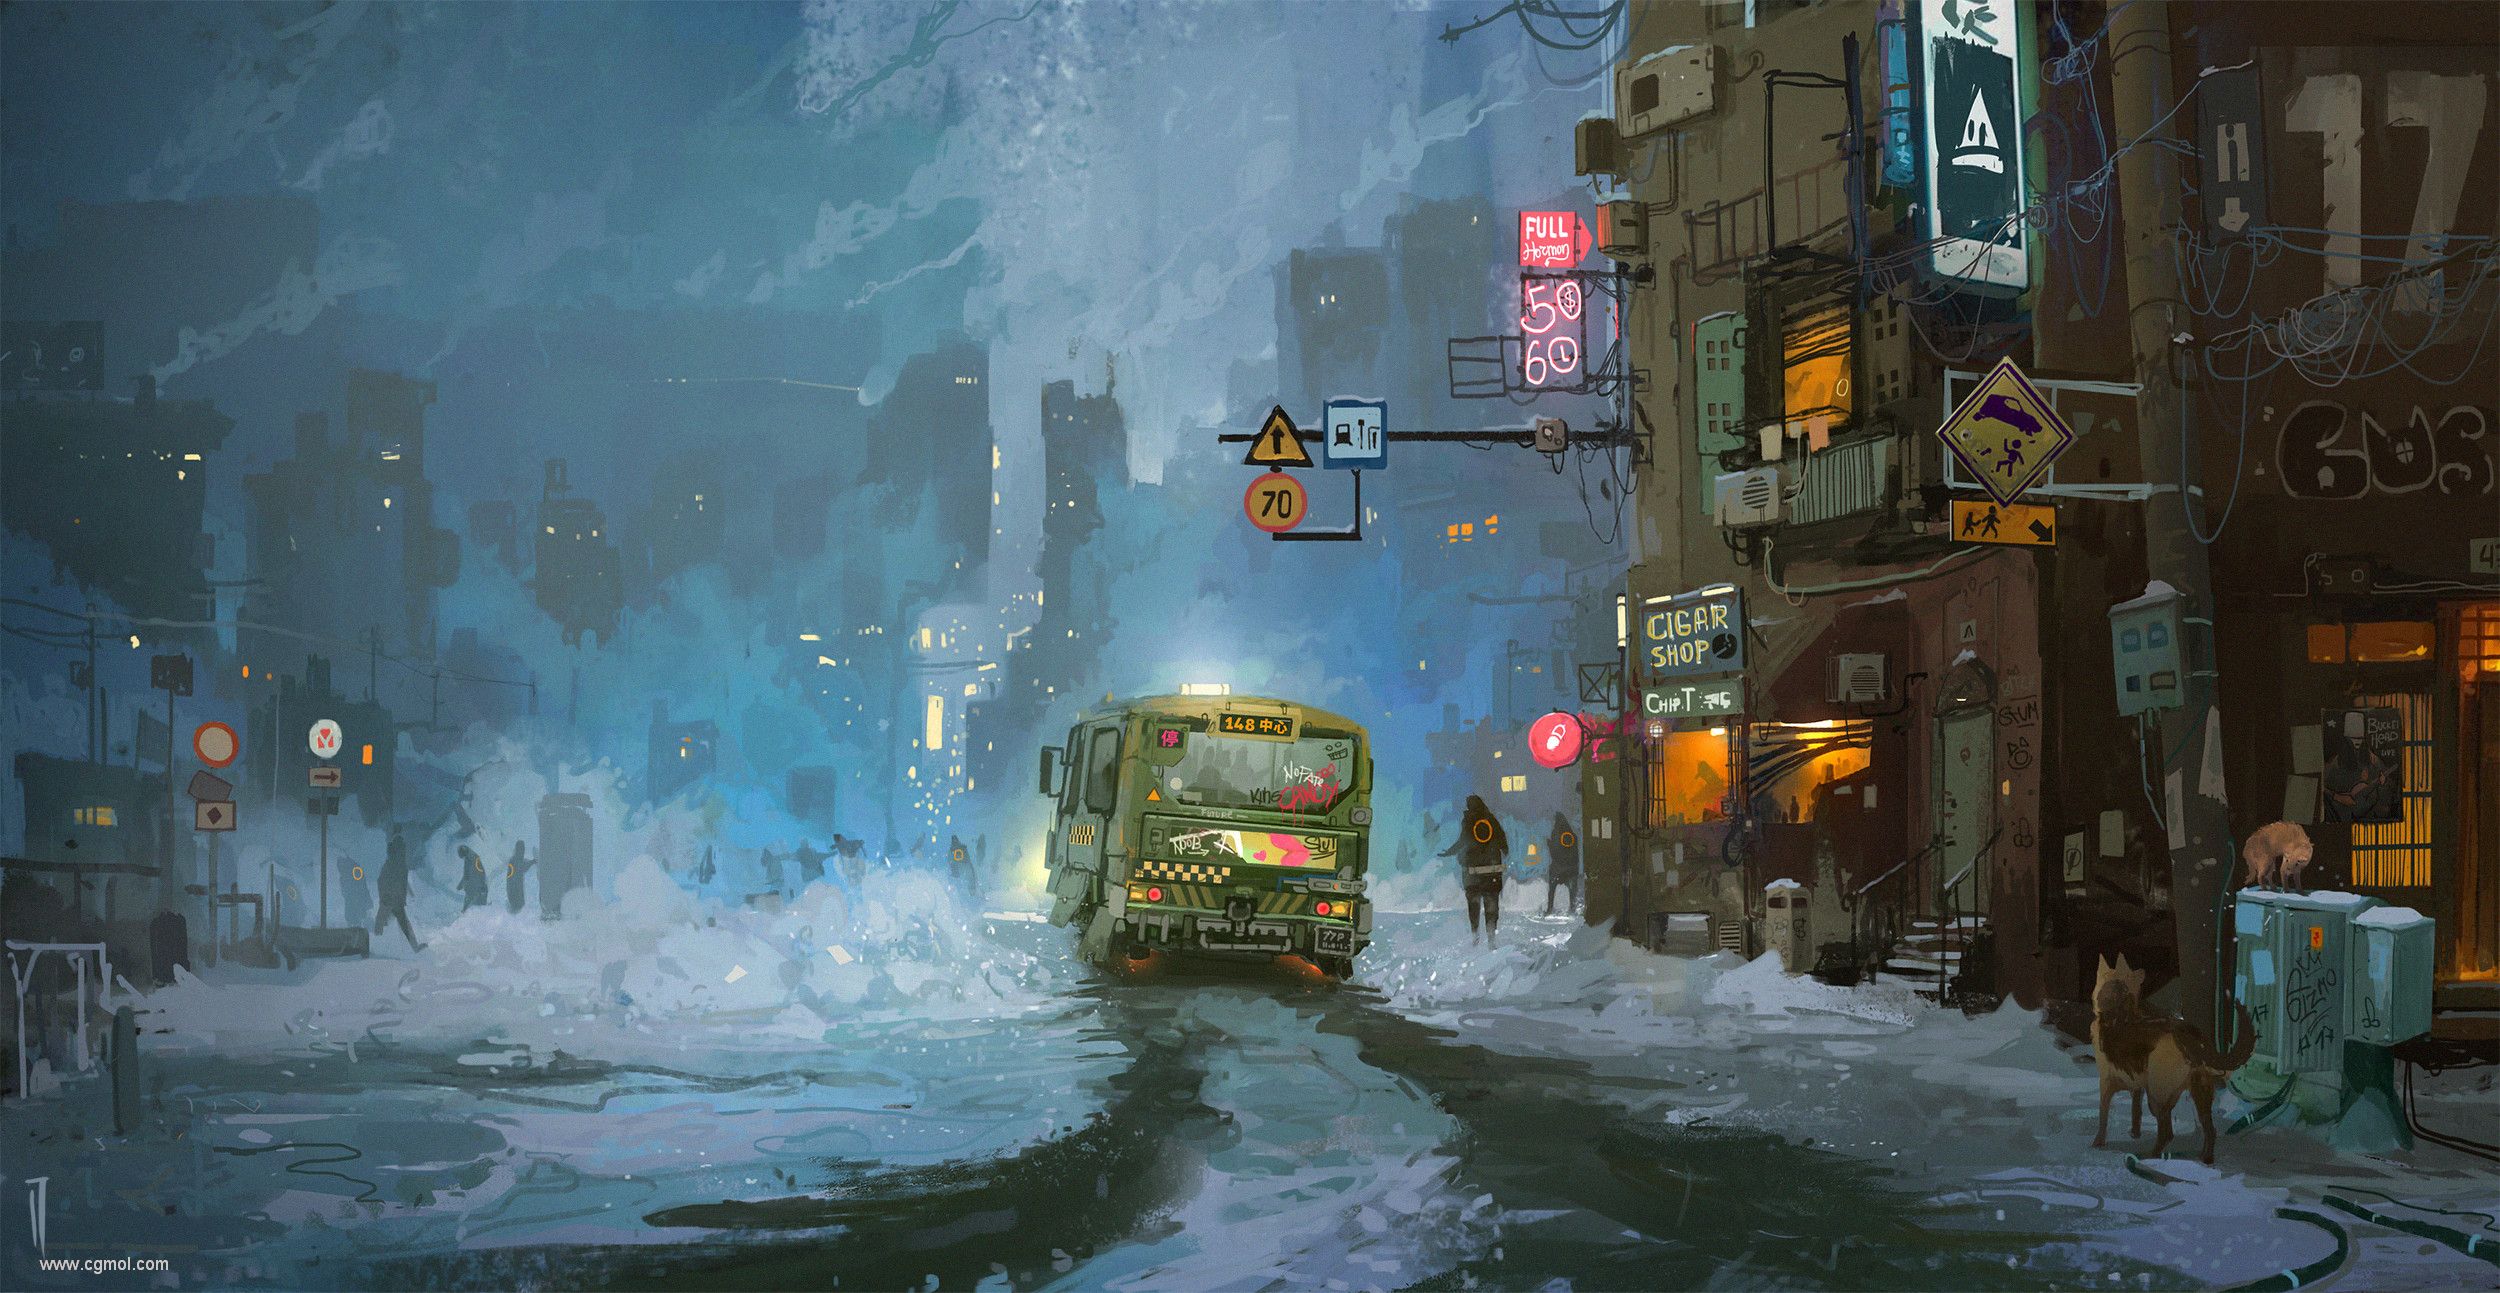 ismail-inceoglu-closing-hours